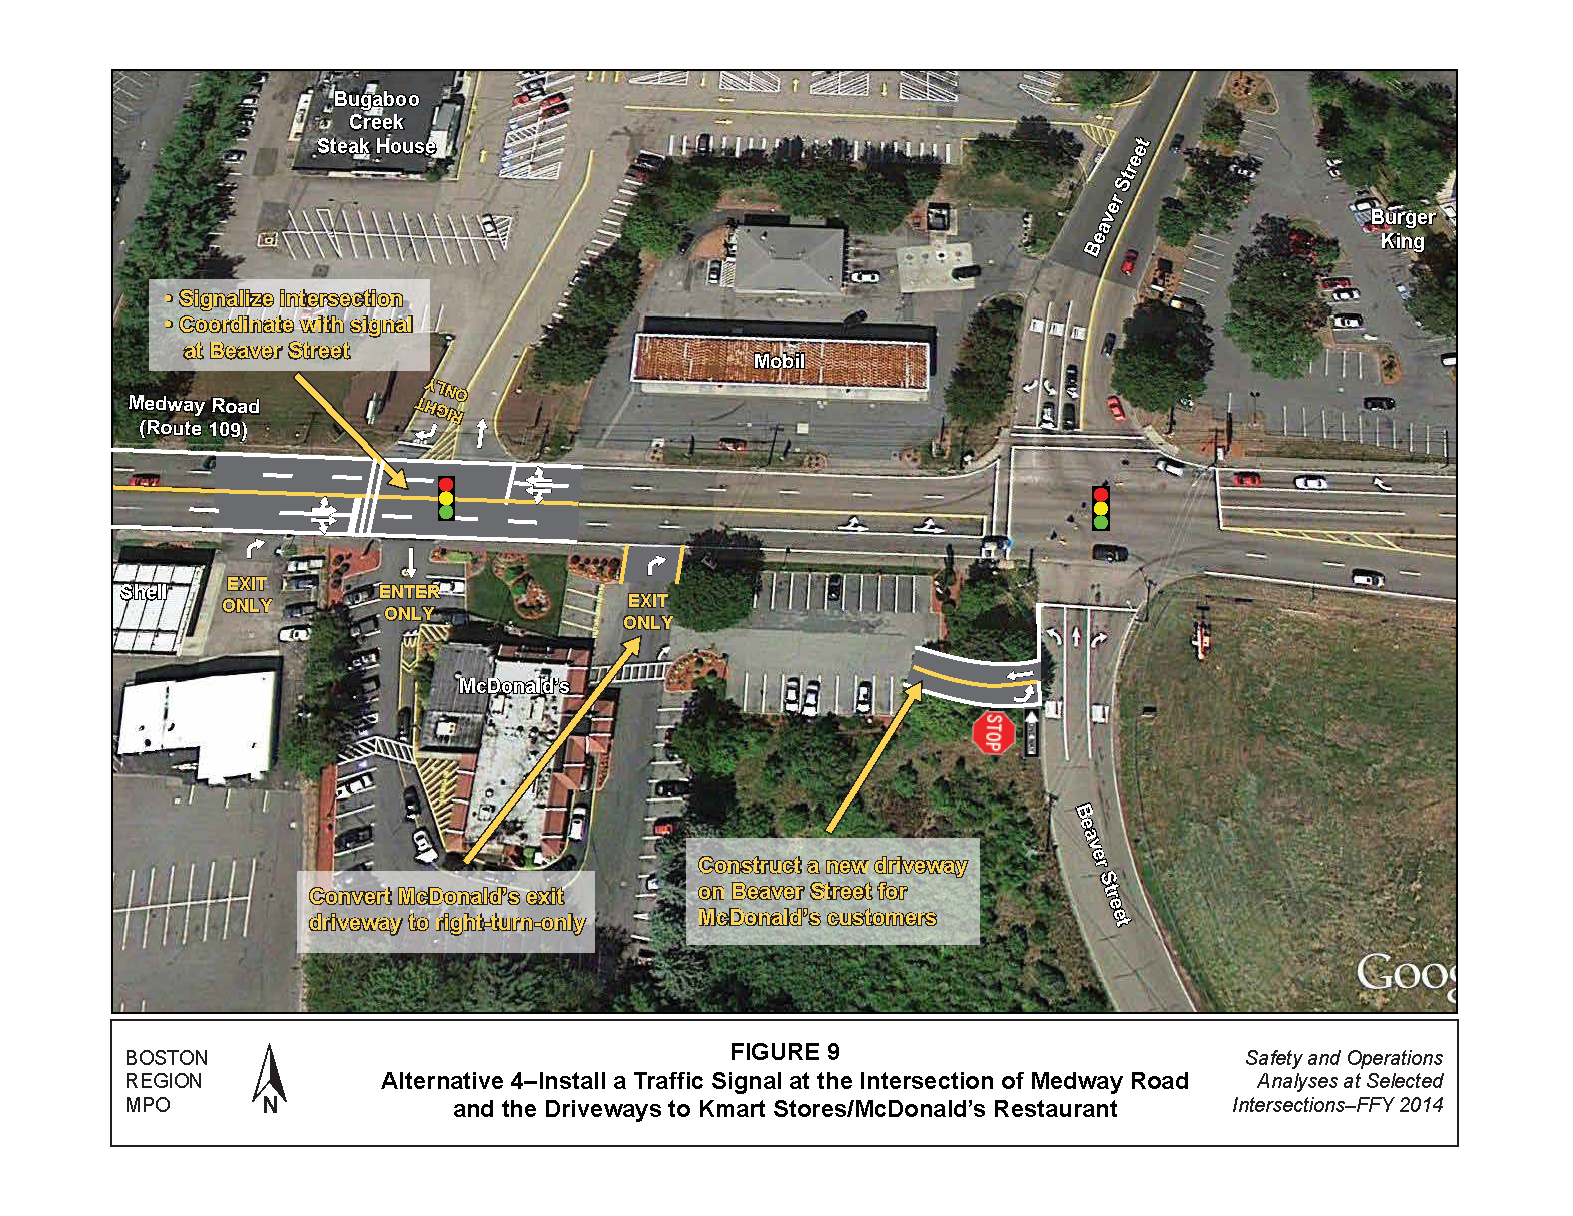 FIGURE 9. Aerial-view map that shows MPO staff “Improvement Alternative 4,” which recommends installing a new traffic signal at the intersection of Medway Road and the driveways to Kmart and McDonald’s to improve safety and access.